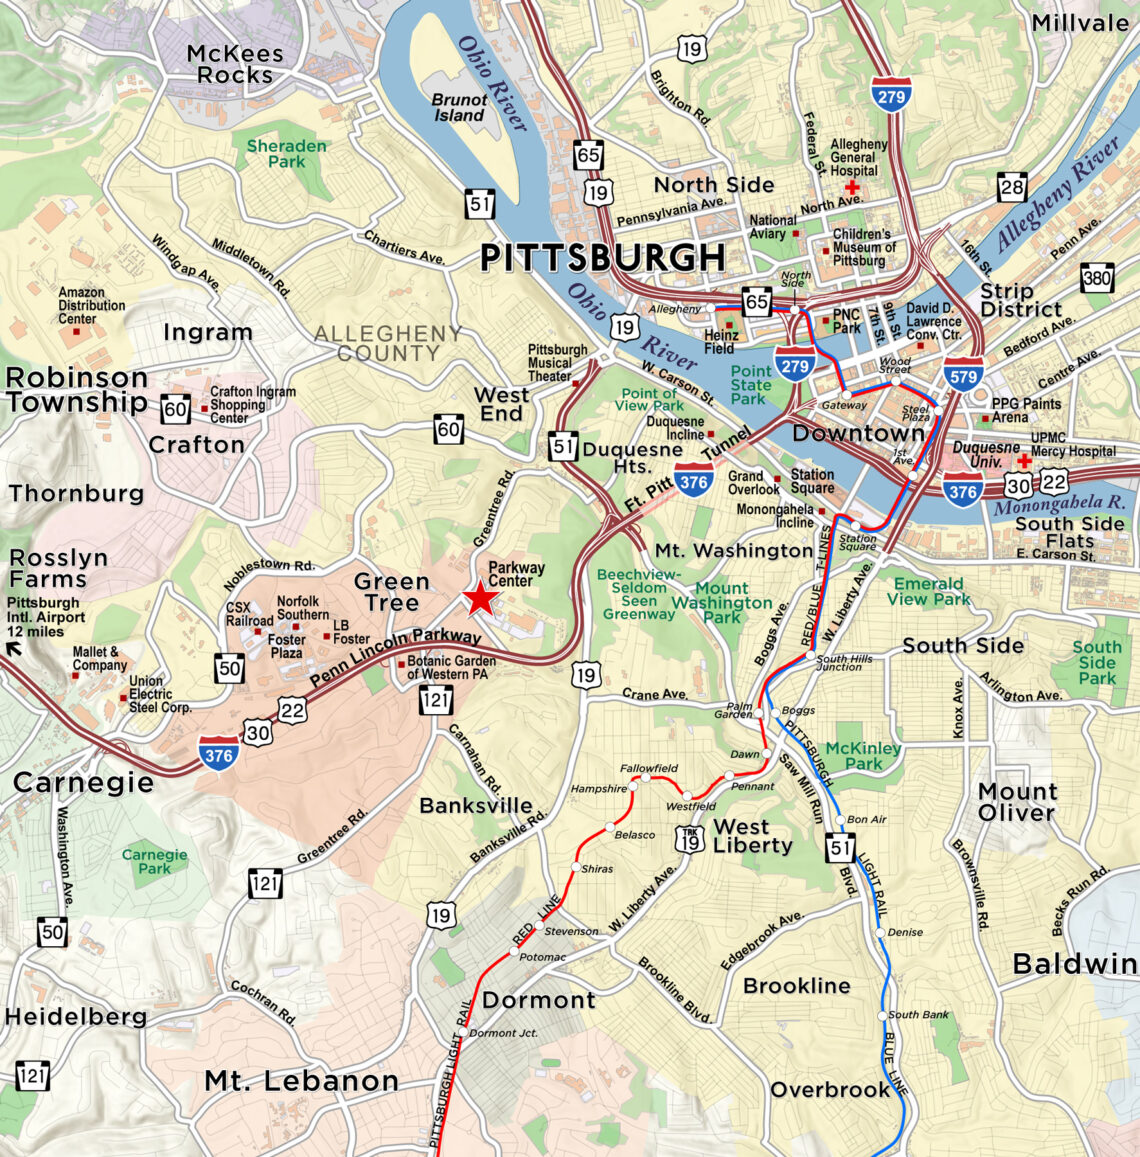 Custom Mapping & GIS Services in Pittsburgh, PA